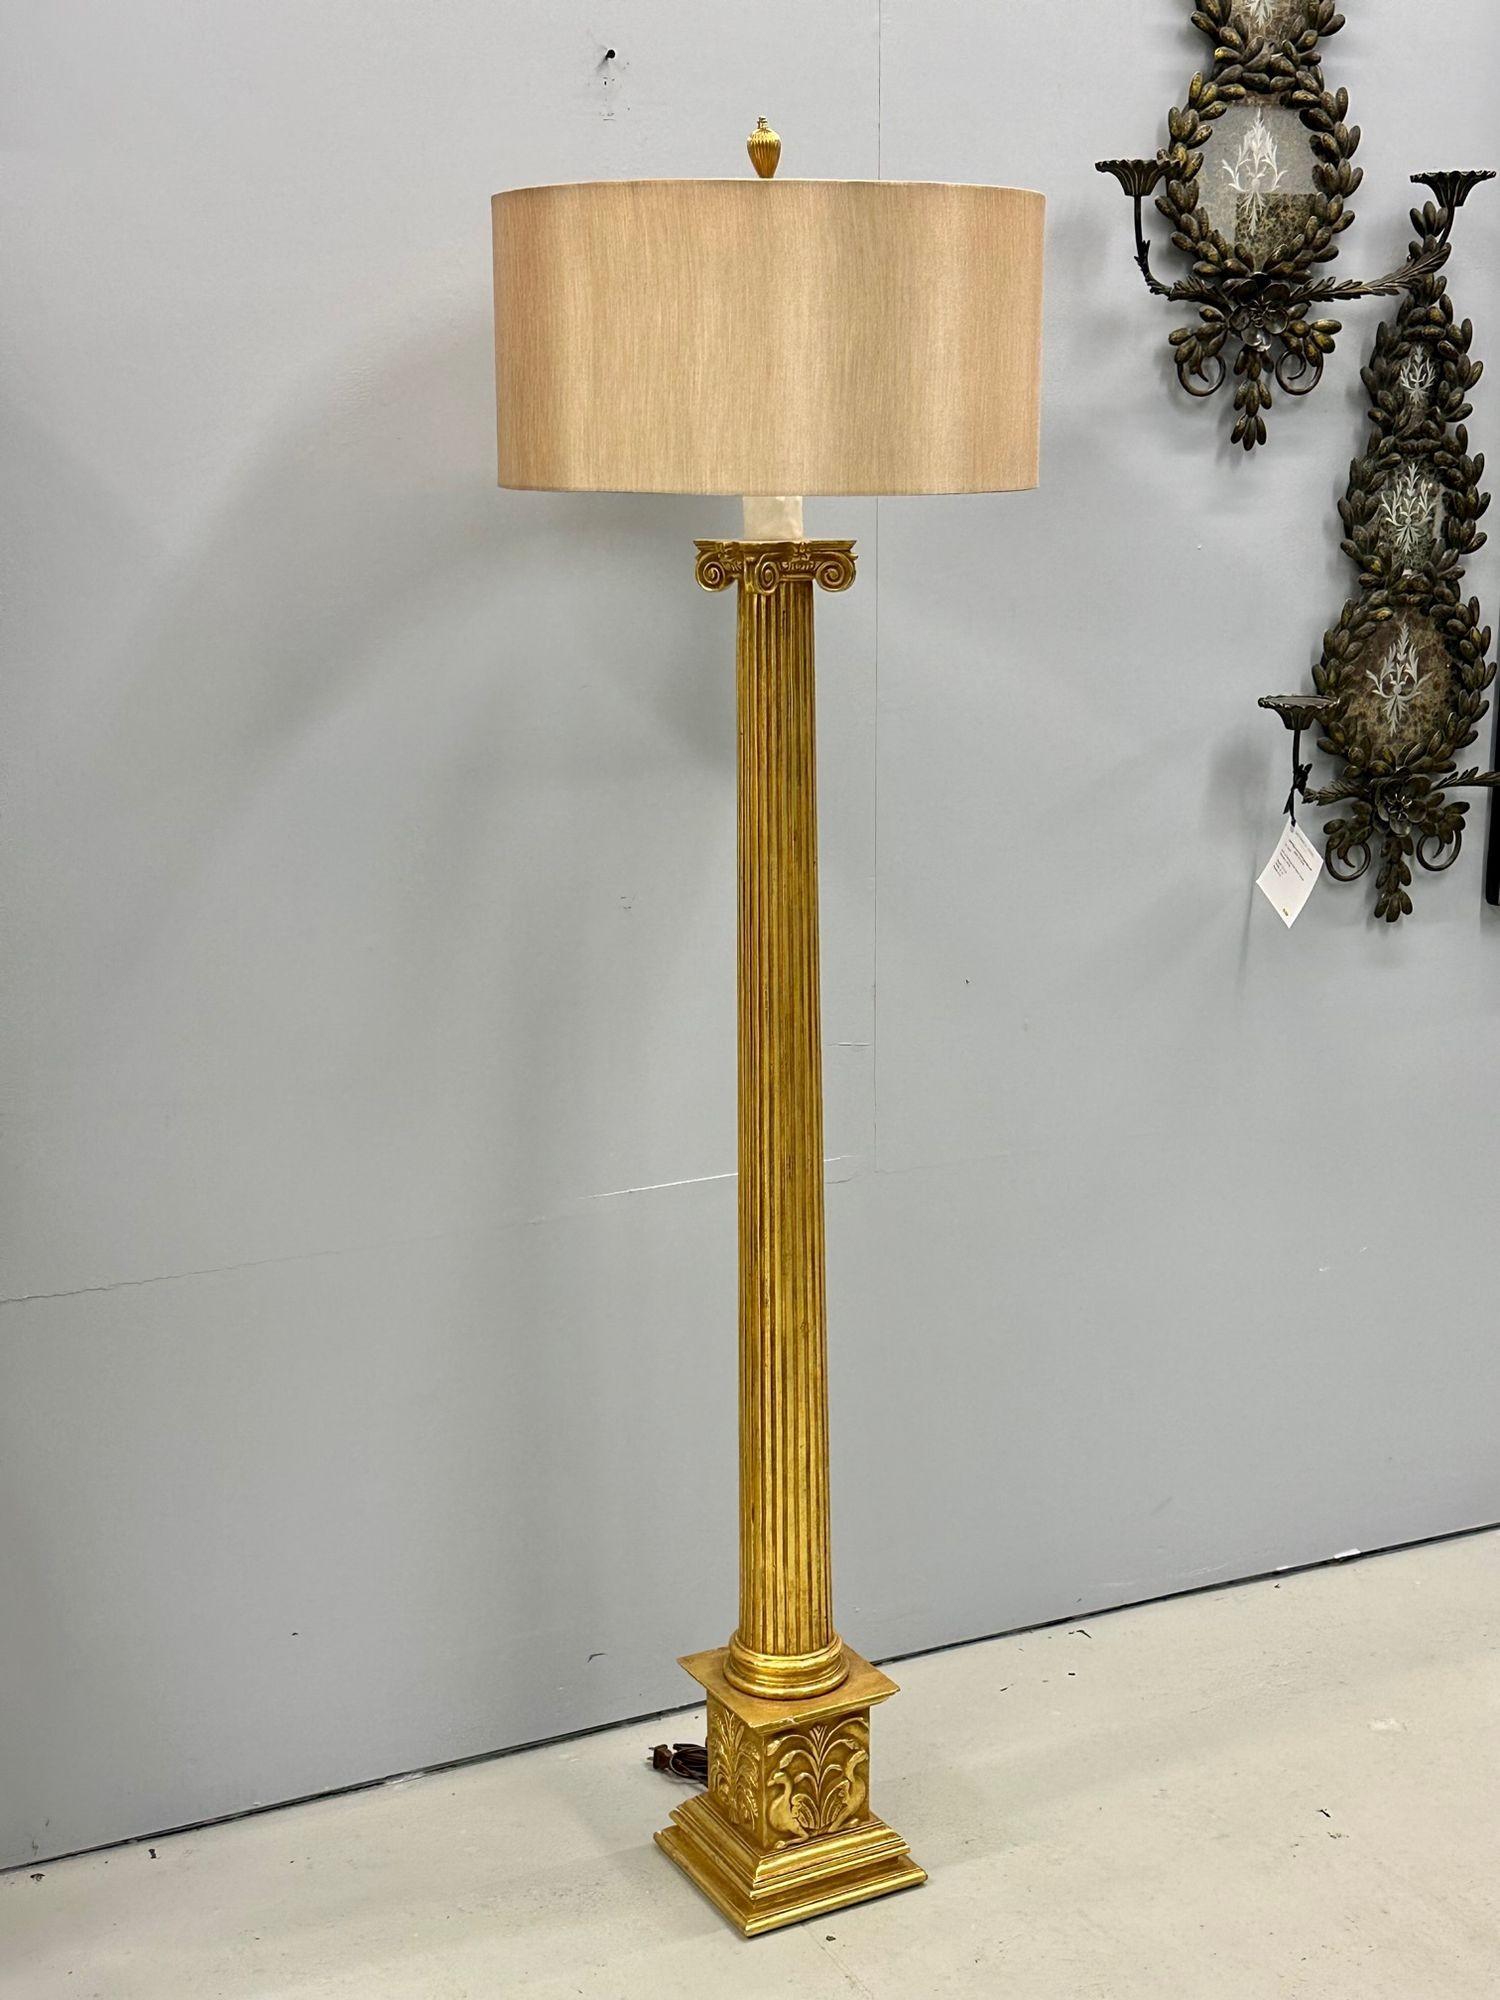 French Hollywood Regency Style Large Giltwood Floor Lamp, Hand Carved
 
Louis XVI style floor lamp having a recessed circular body on top of an intricately hand carved square base depicting doves and flowers. Sold with shade.
 
68 5/8H x 8.25W x